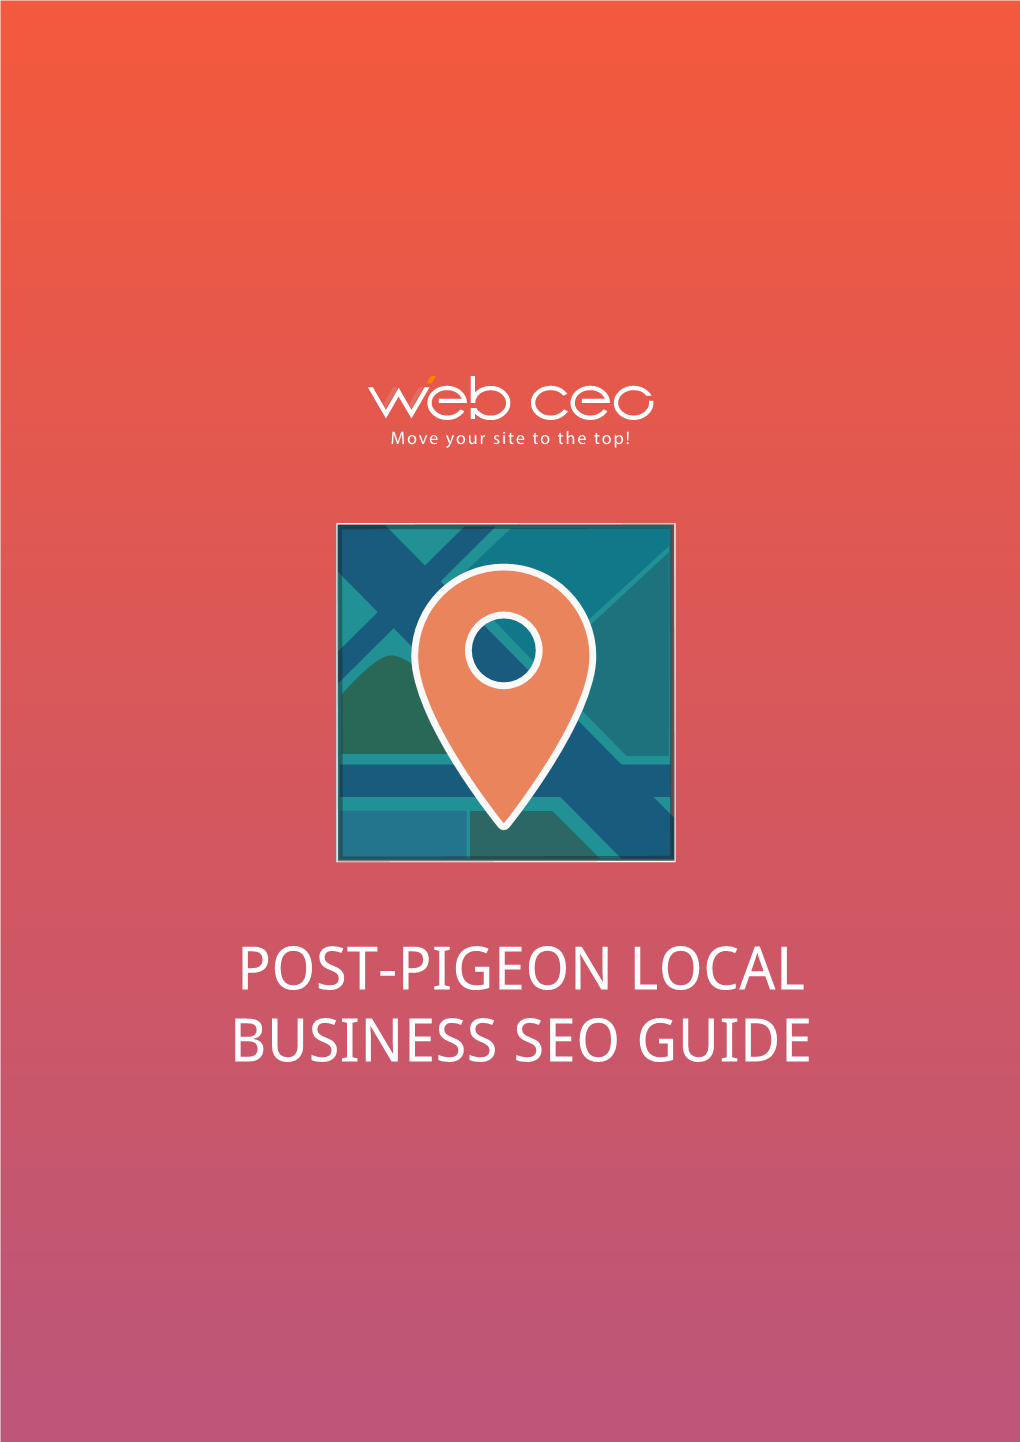 POST-PIGEON LOCAL BUSINESS SEO GUIDE Post-Pigeon Local Business SEO Guide